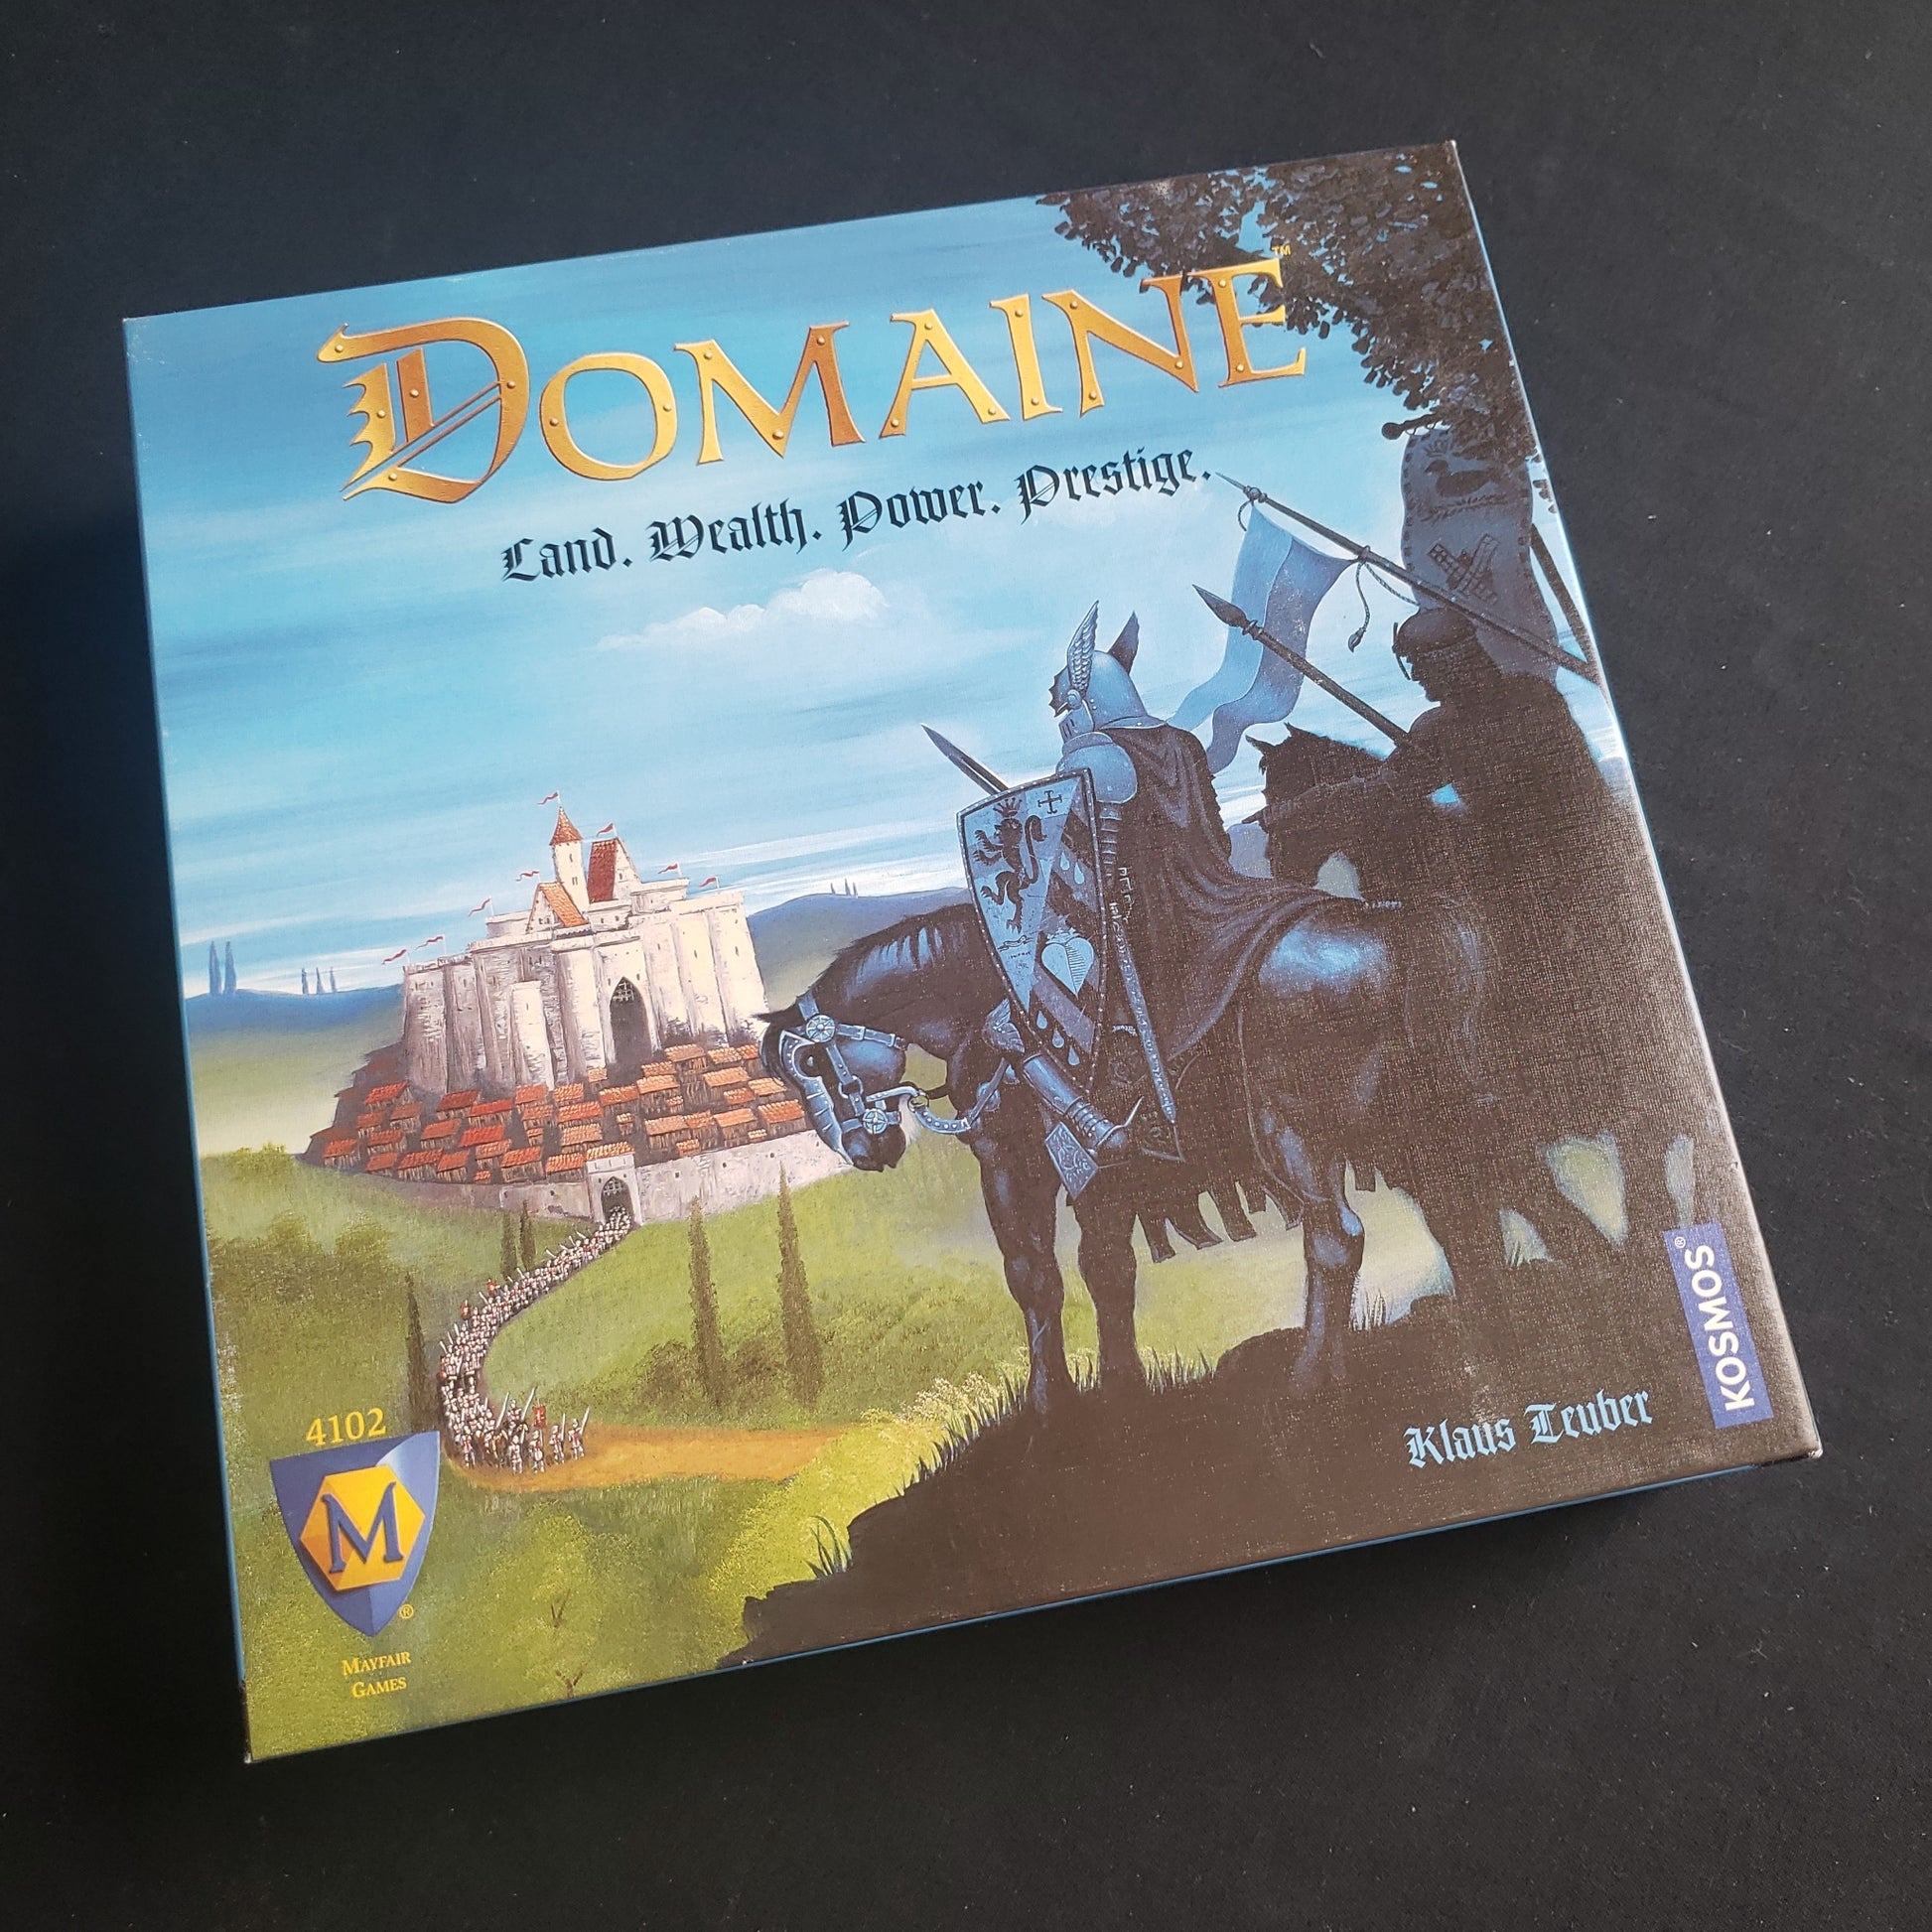 Image shows the front cover of the box of the Domaine board game